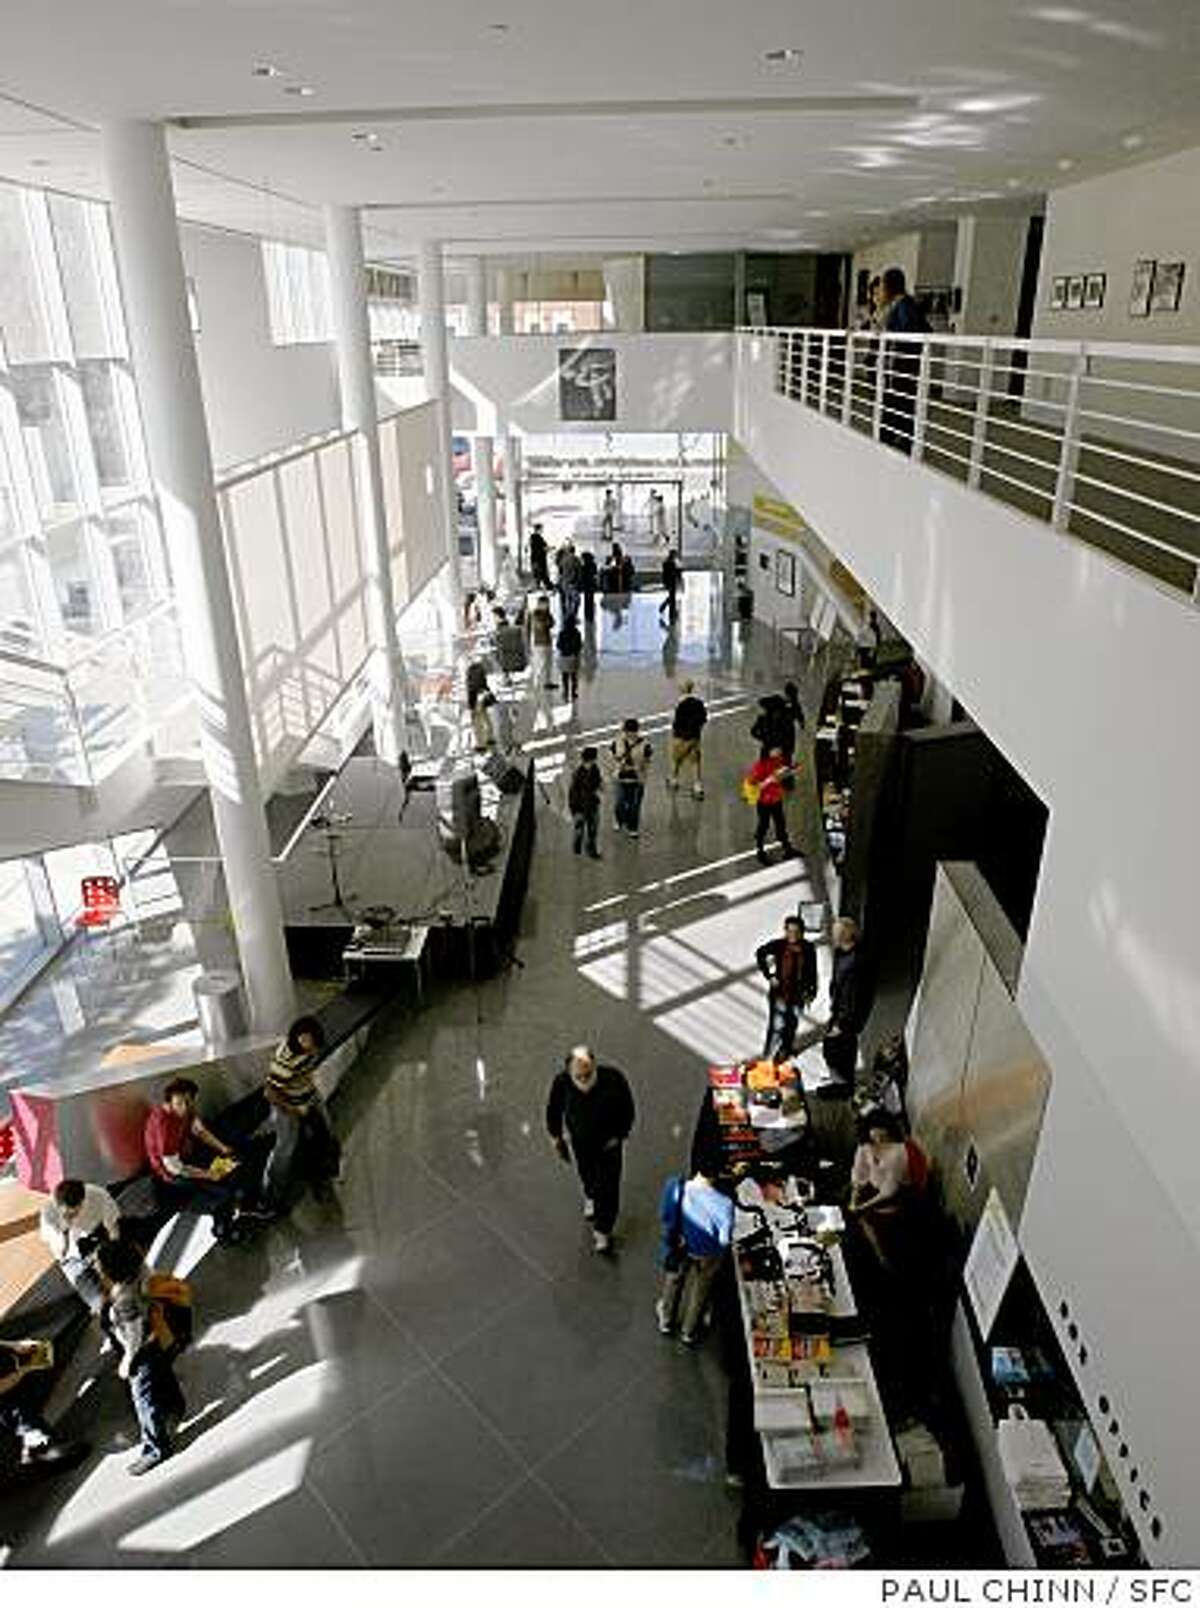 The lobby is filled with displays for the "What's the Big Idea Day" event at the Yerba Buena Center for the Arts in San Francisco, Calif. on Saturday, Feb. 9, 2008.